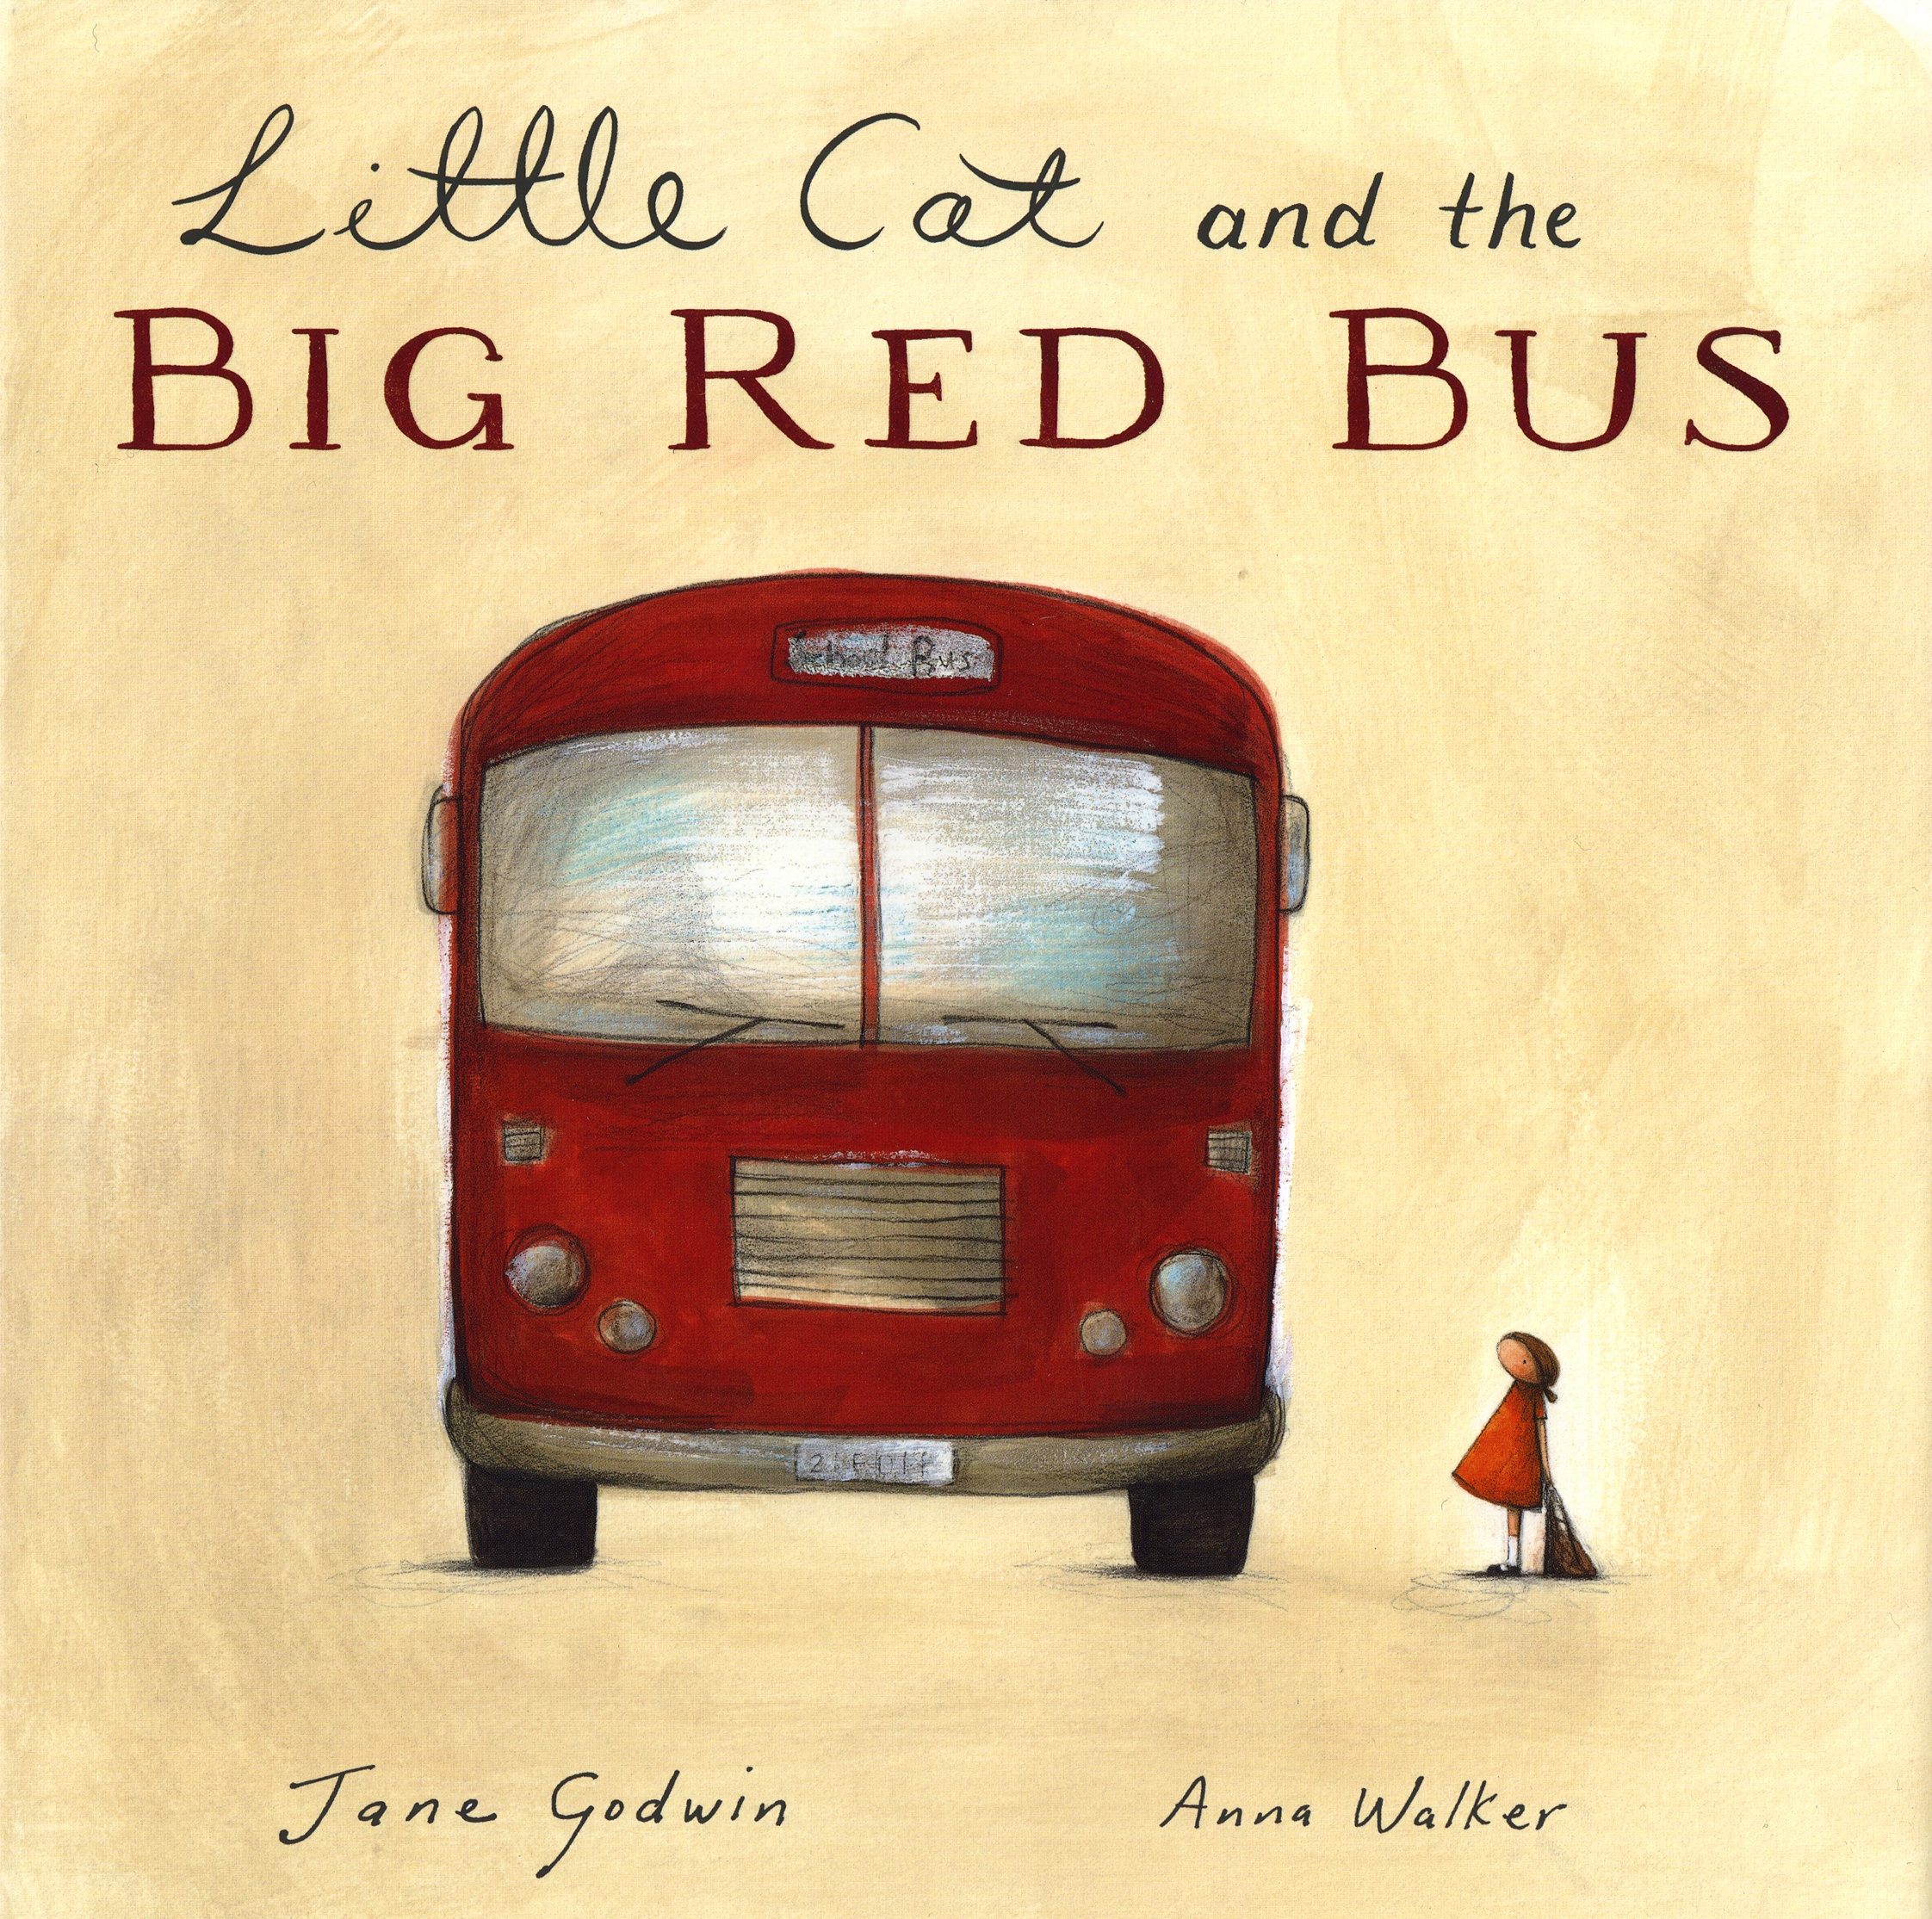     Little Cat and the Big Red Bus (illustrated by Anna Walker)  2008   Little Cat and the Big Red Bus   I used to visit lots of schools in the country and sometimes we’d talk about different experiences we’d had. &nbsp;  We talked about funny things